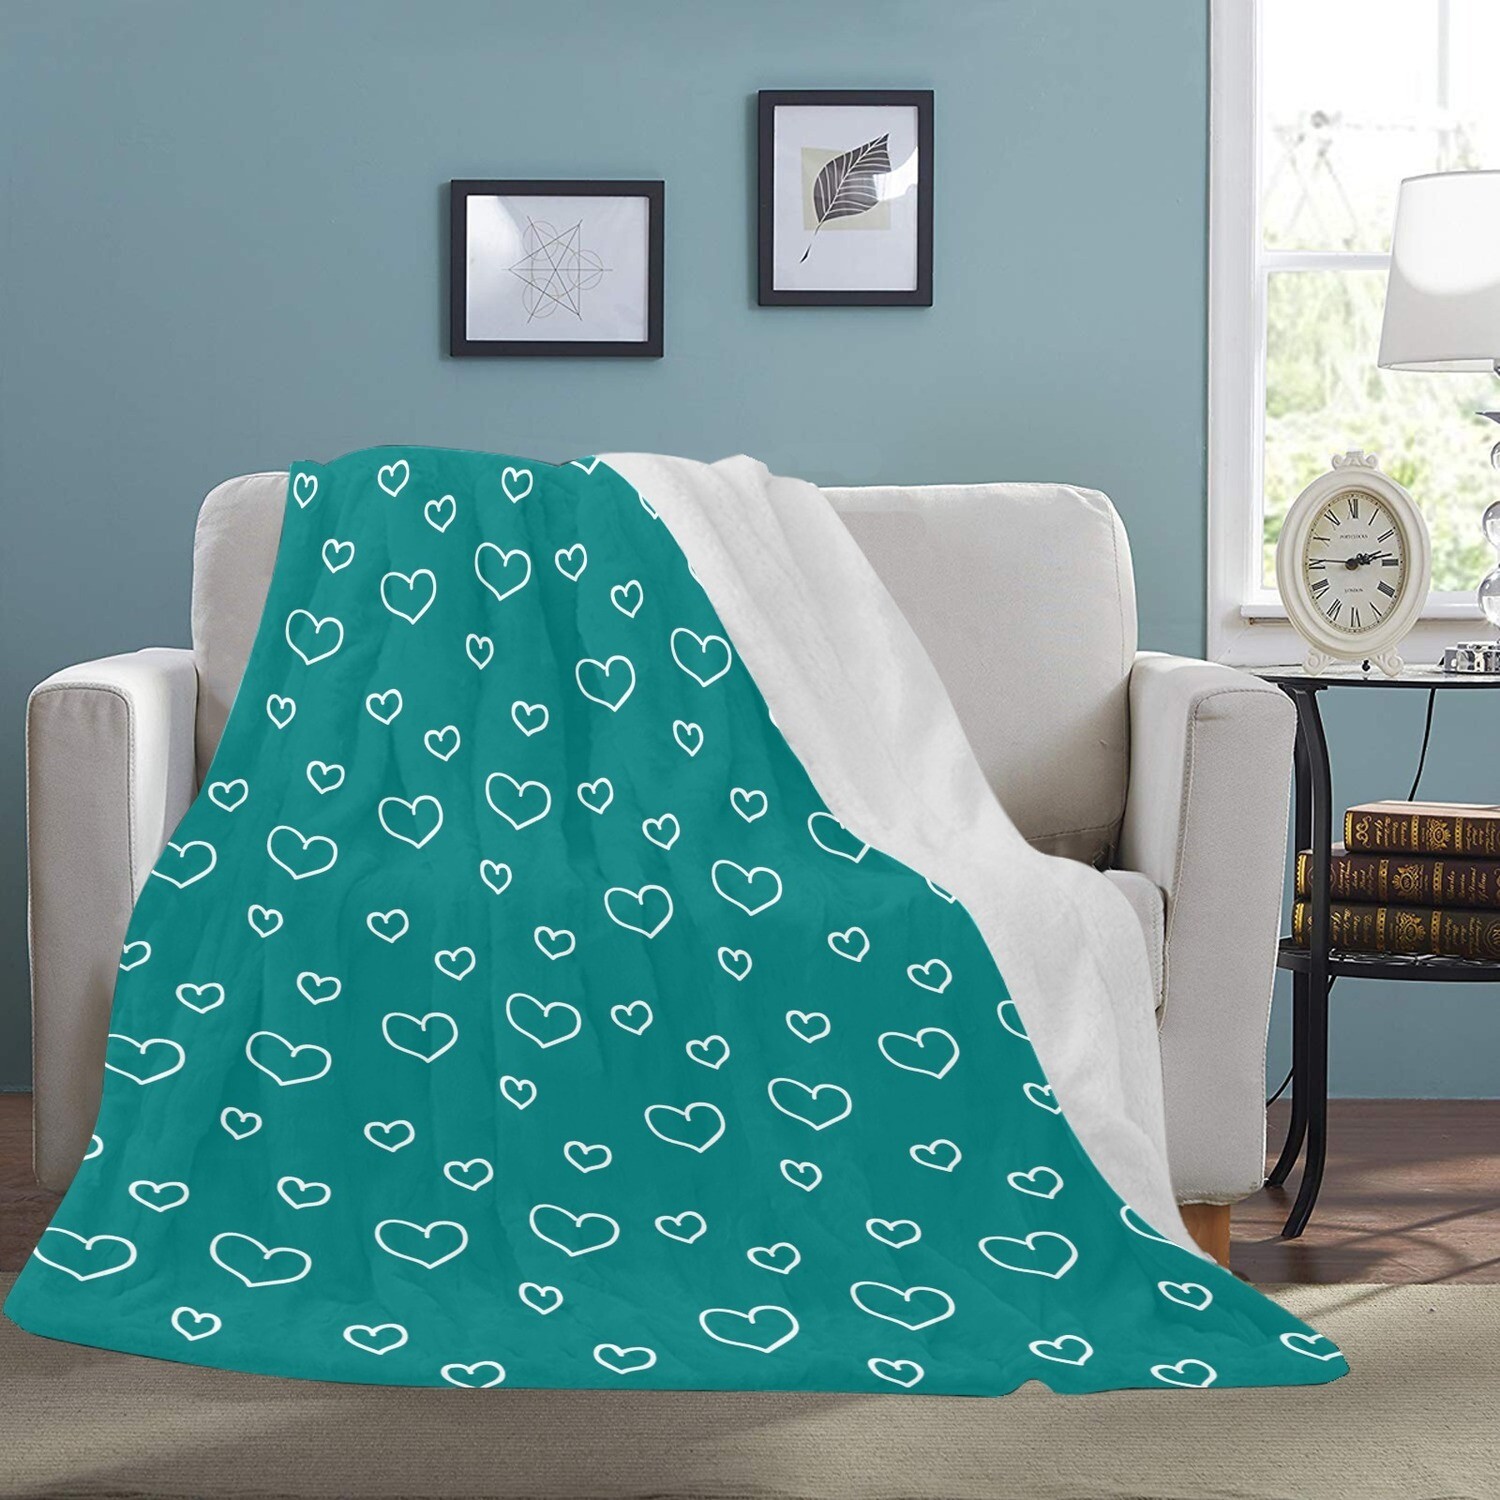 🤴🏽👸🏽💕Large Ultra-Soft Micro Fleece Blanket Valentine white outline hearts on teal, gift, gift for her, gift for him, gift for them, 70"x80"